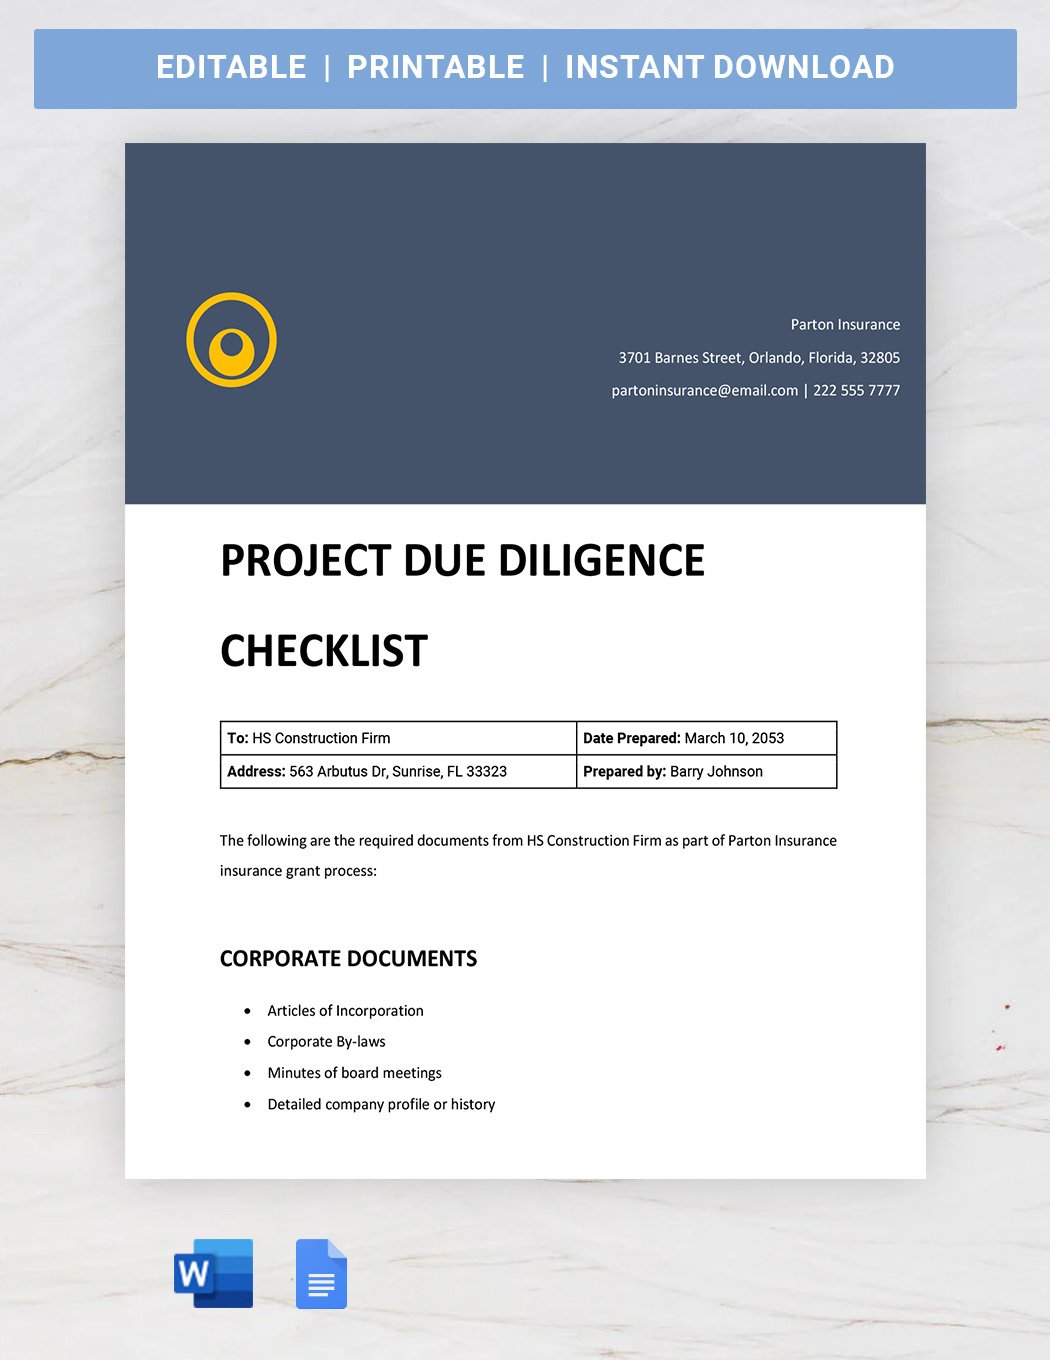 Project Due Diligence 